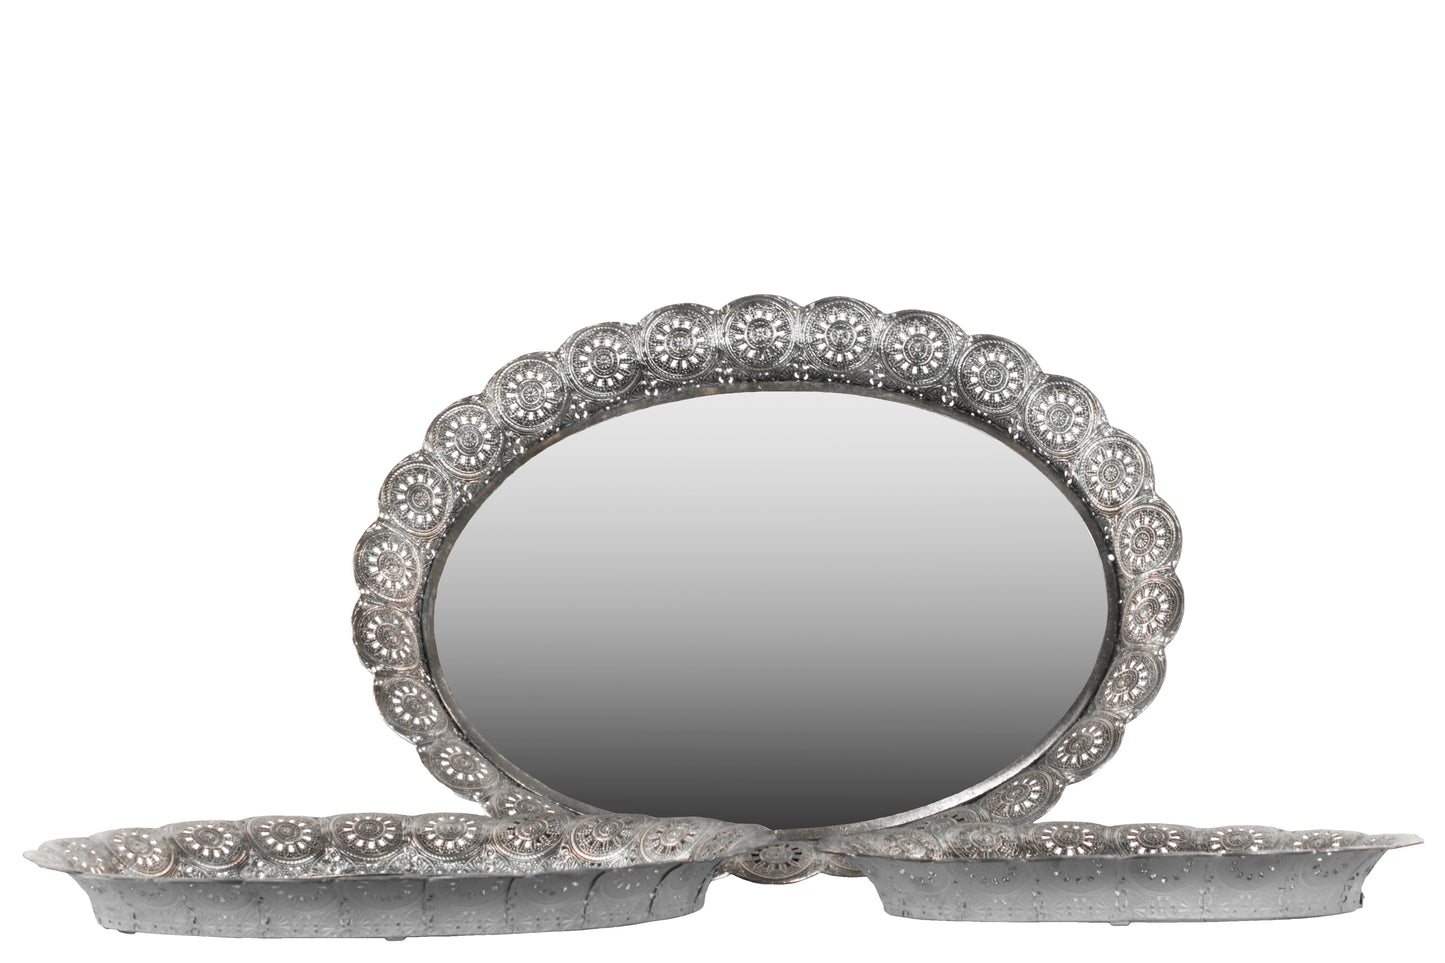 Metal Oval Tray with Mirror Surface and Pierced Metal Frame